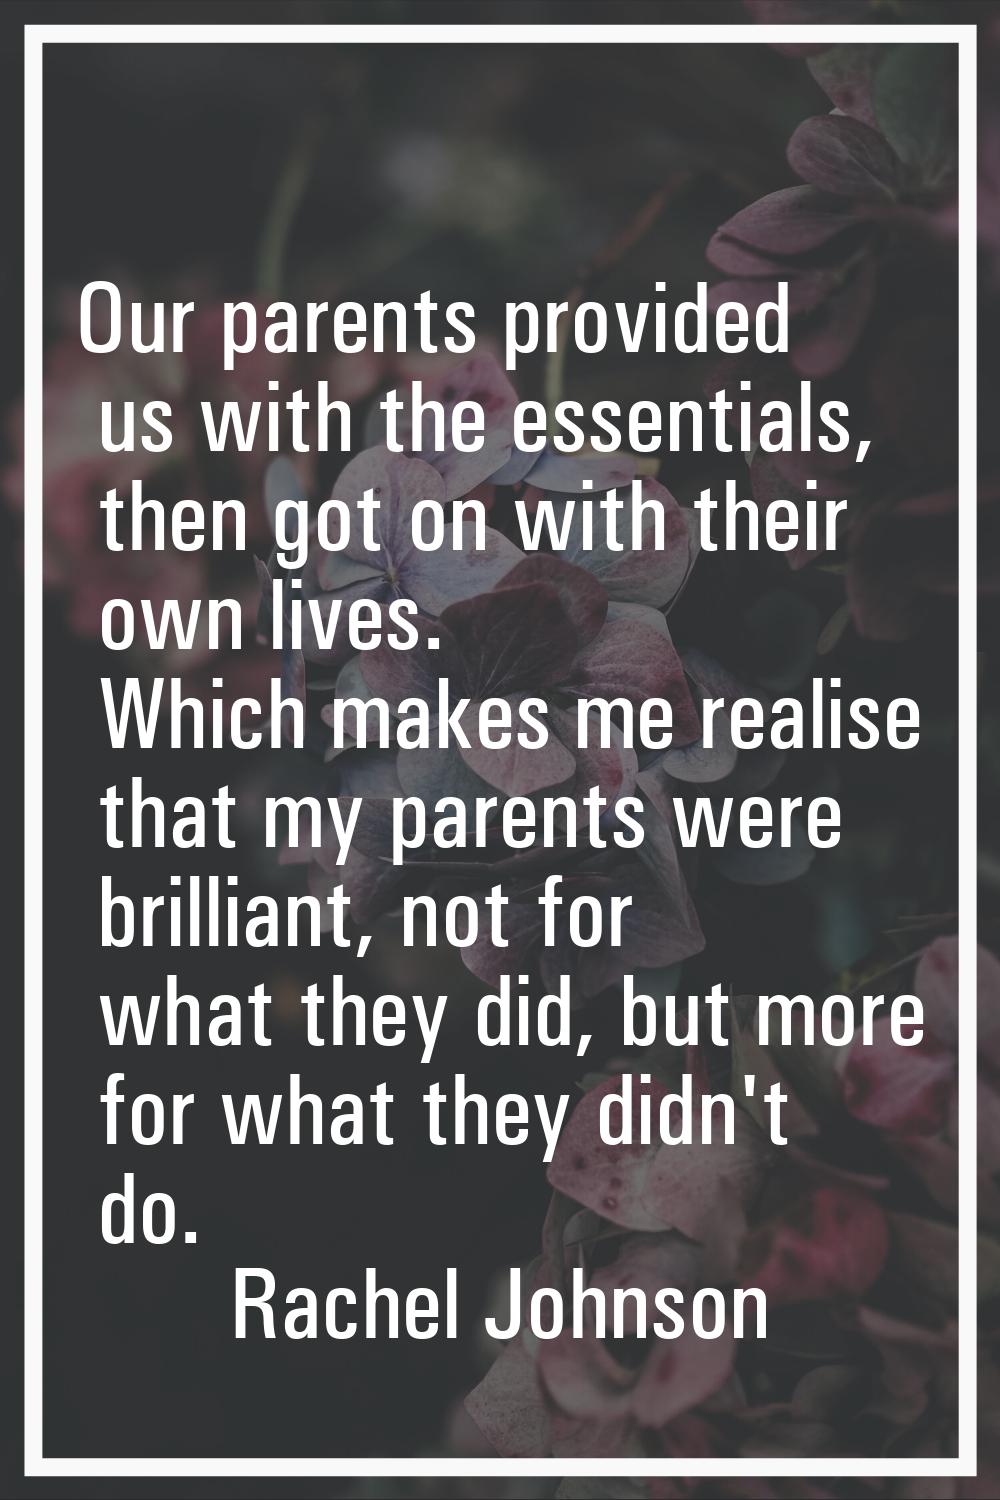 Our parents provided us with the essentials, then got on with their own lives. Which makes me reali